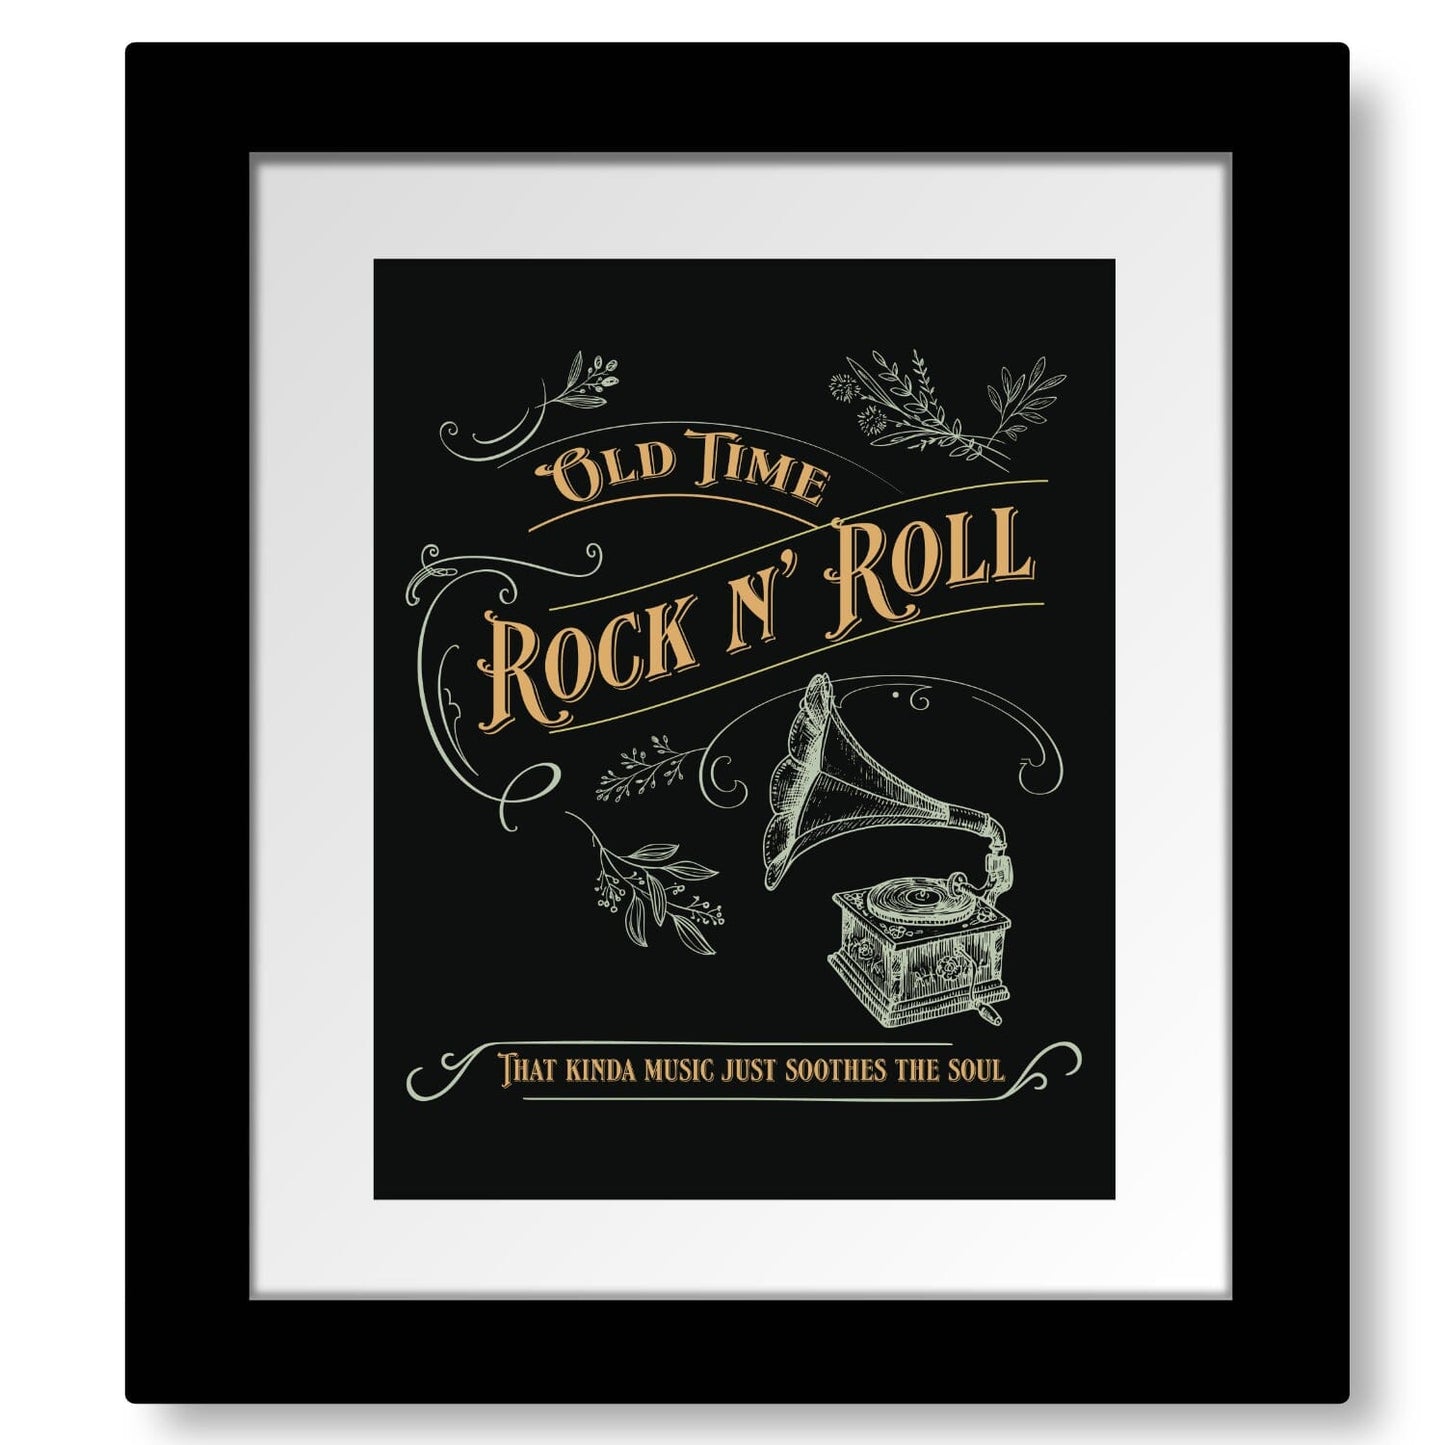 Old Time Rock N' Roll by Bob Seger - Song Lyrics Art Print Song Lyrics Art Song Lyrics Art 8x10 Framed and White Matted Print 